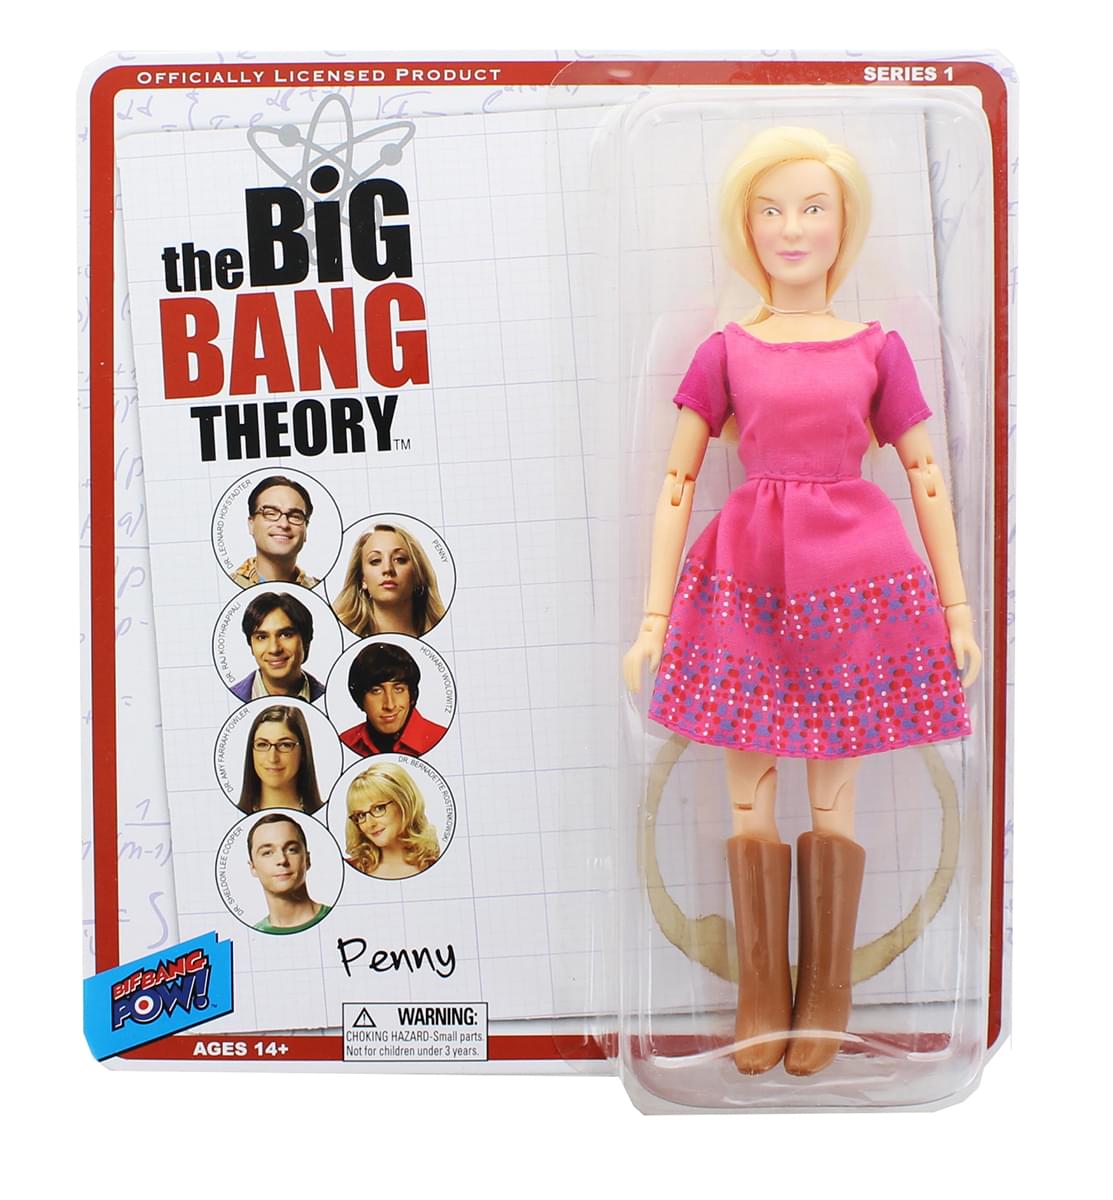 Big Bang Theory 8" Retro Clothed Action Figure, Penny